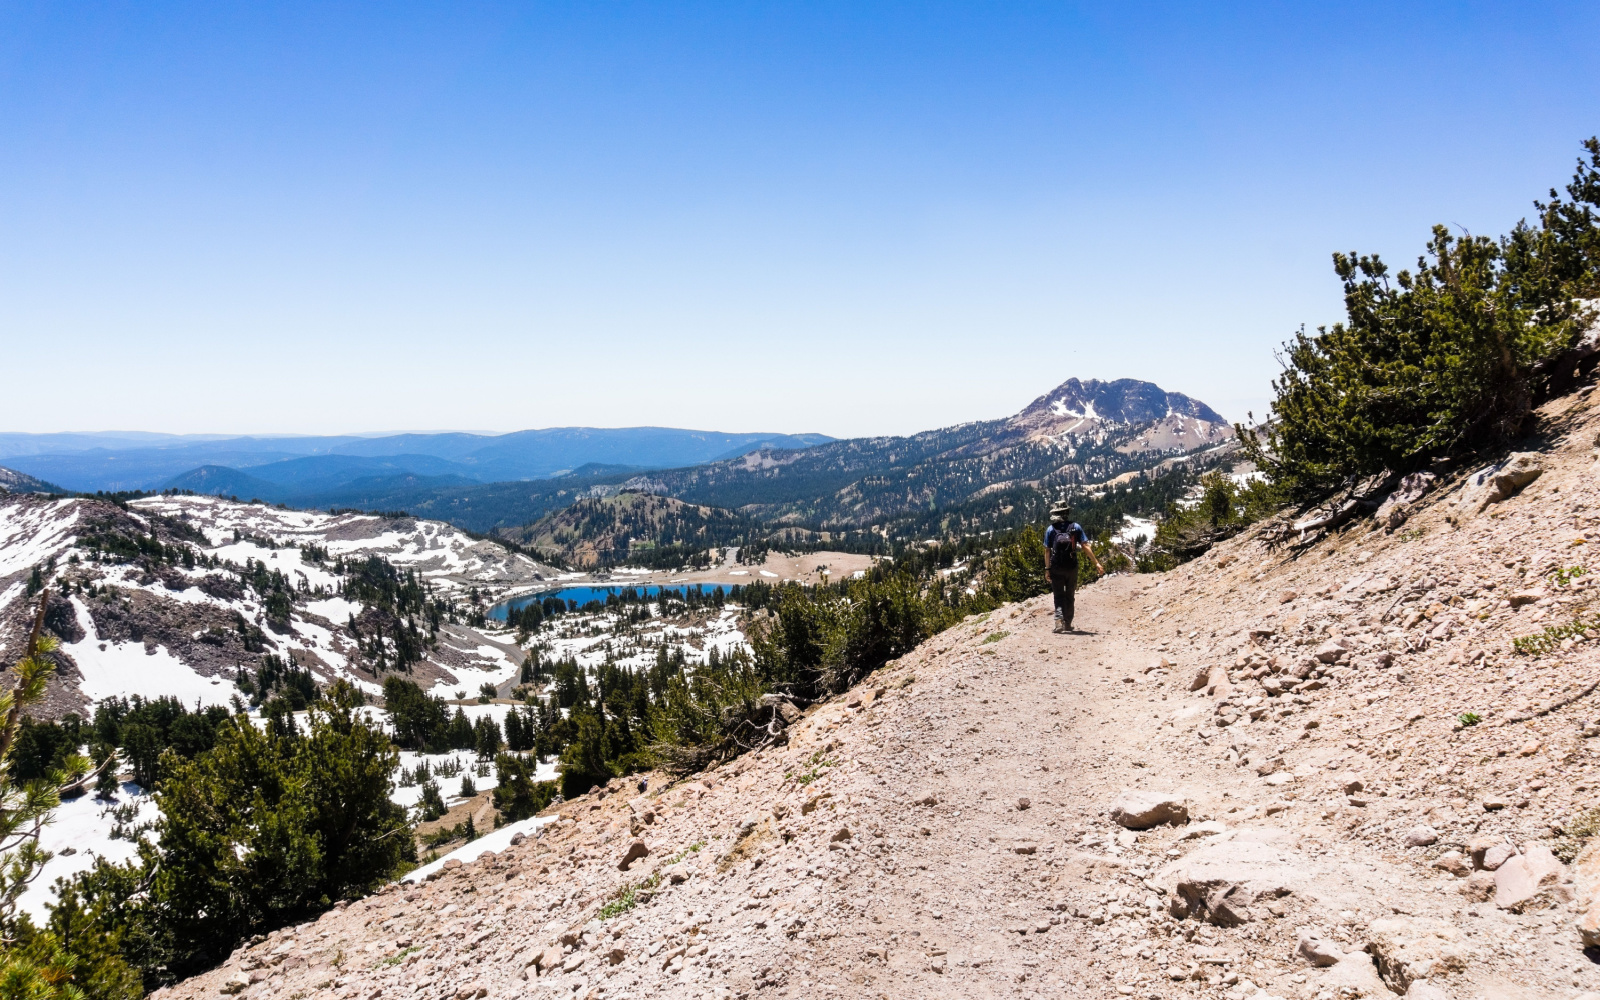 The Best Time to Visit Lassen Volcanic National Park